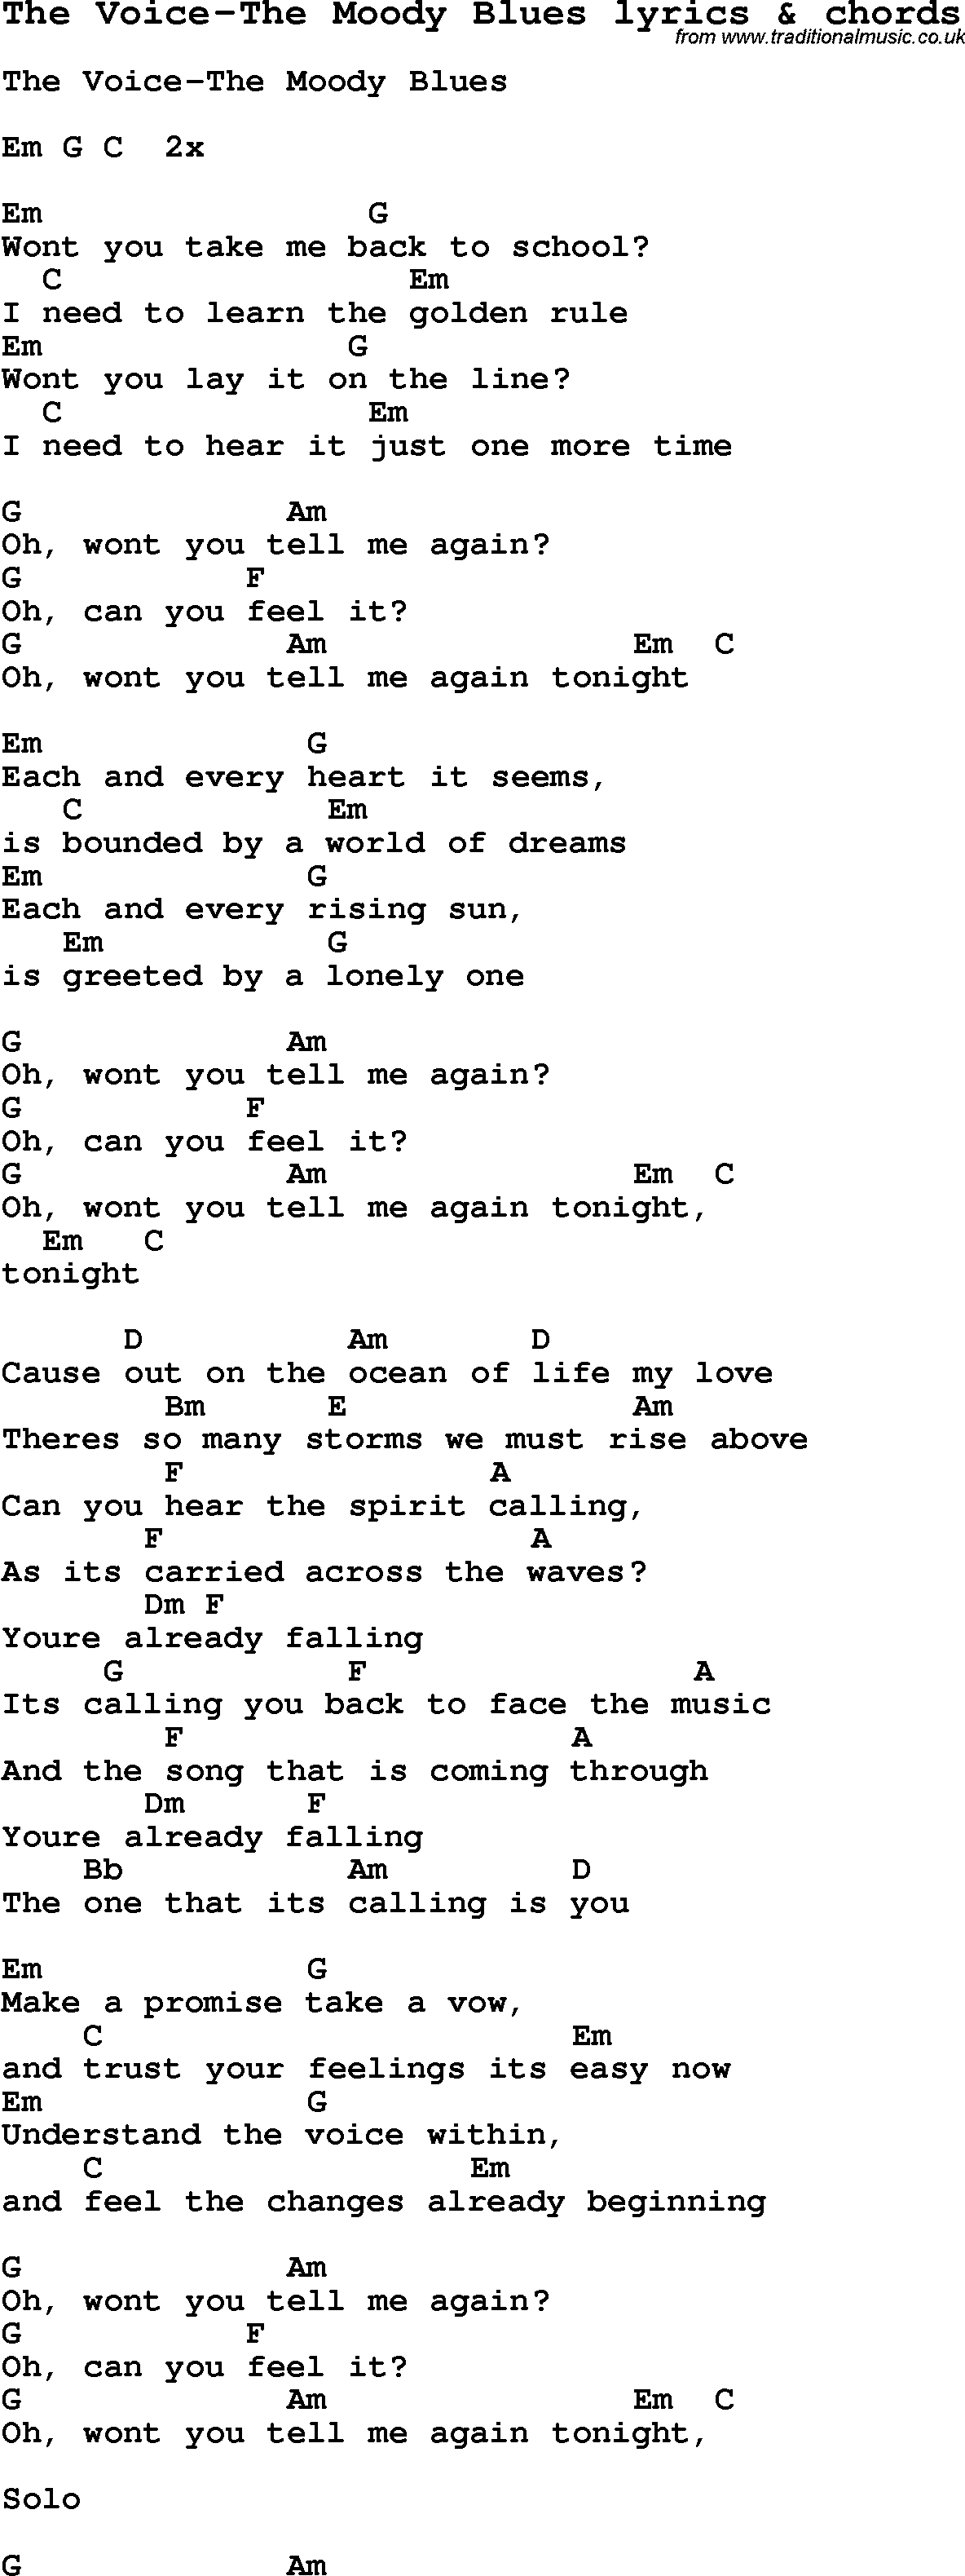 Love Song Lyrics for: The Voice-The Moody Blues with chords for Ukulele, Guitar Banjo etc.